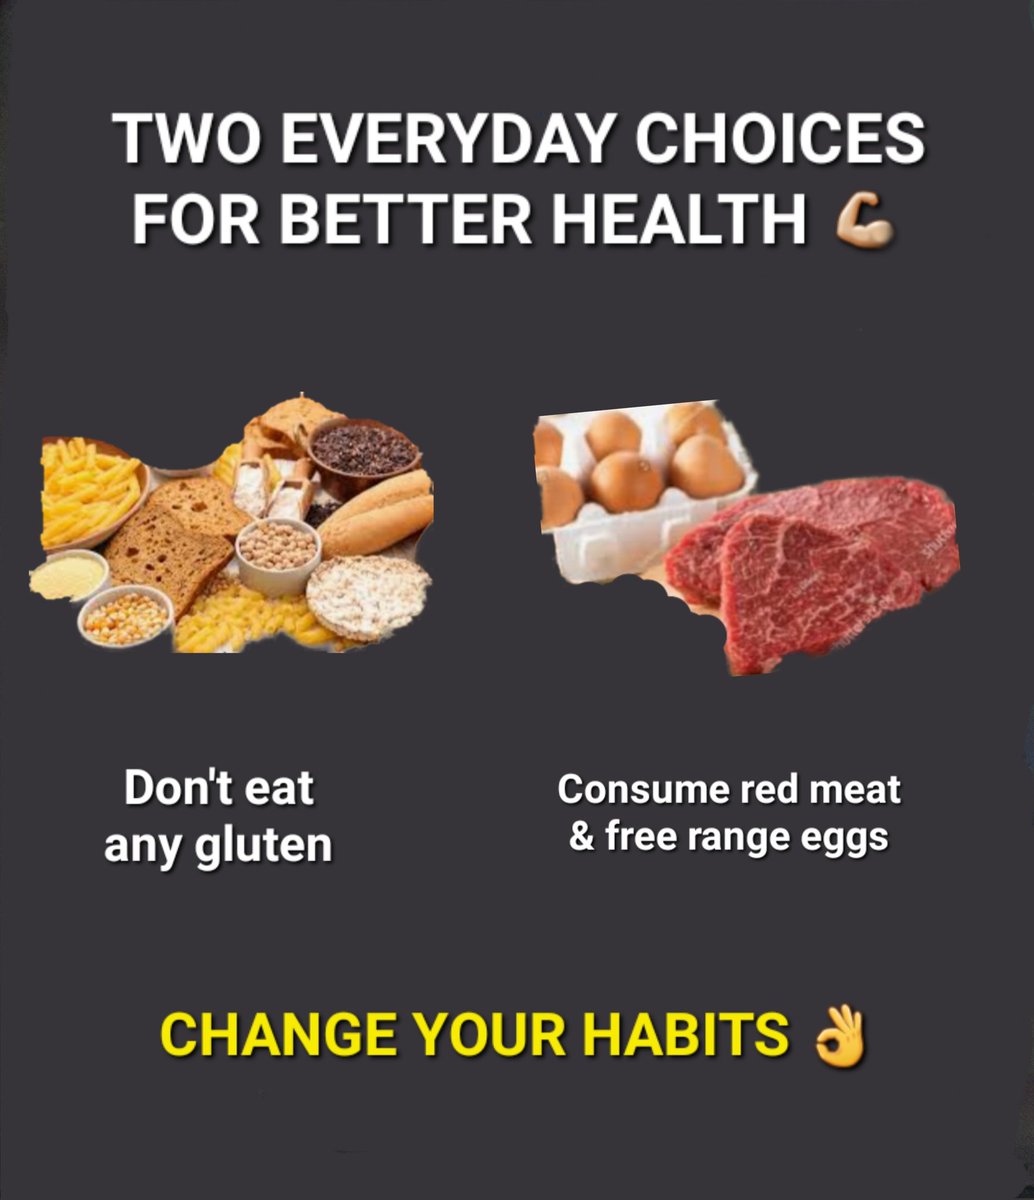 MAKE HEALTHIER EASY 👌 Simple better choices. Gluten fights against every metabolic & biological process the human body has 😥 Nutrition can be complicated, but make it simple & bulletproof your future, change your habits. #health #nutrition #habits #gluten #redmeat #eggs